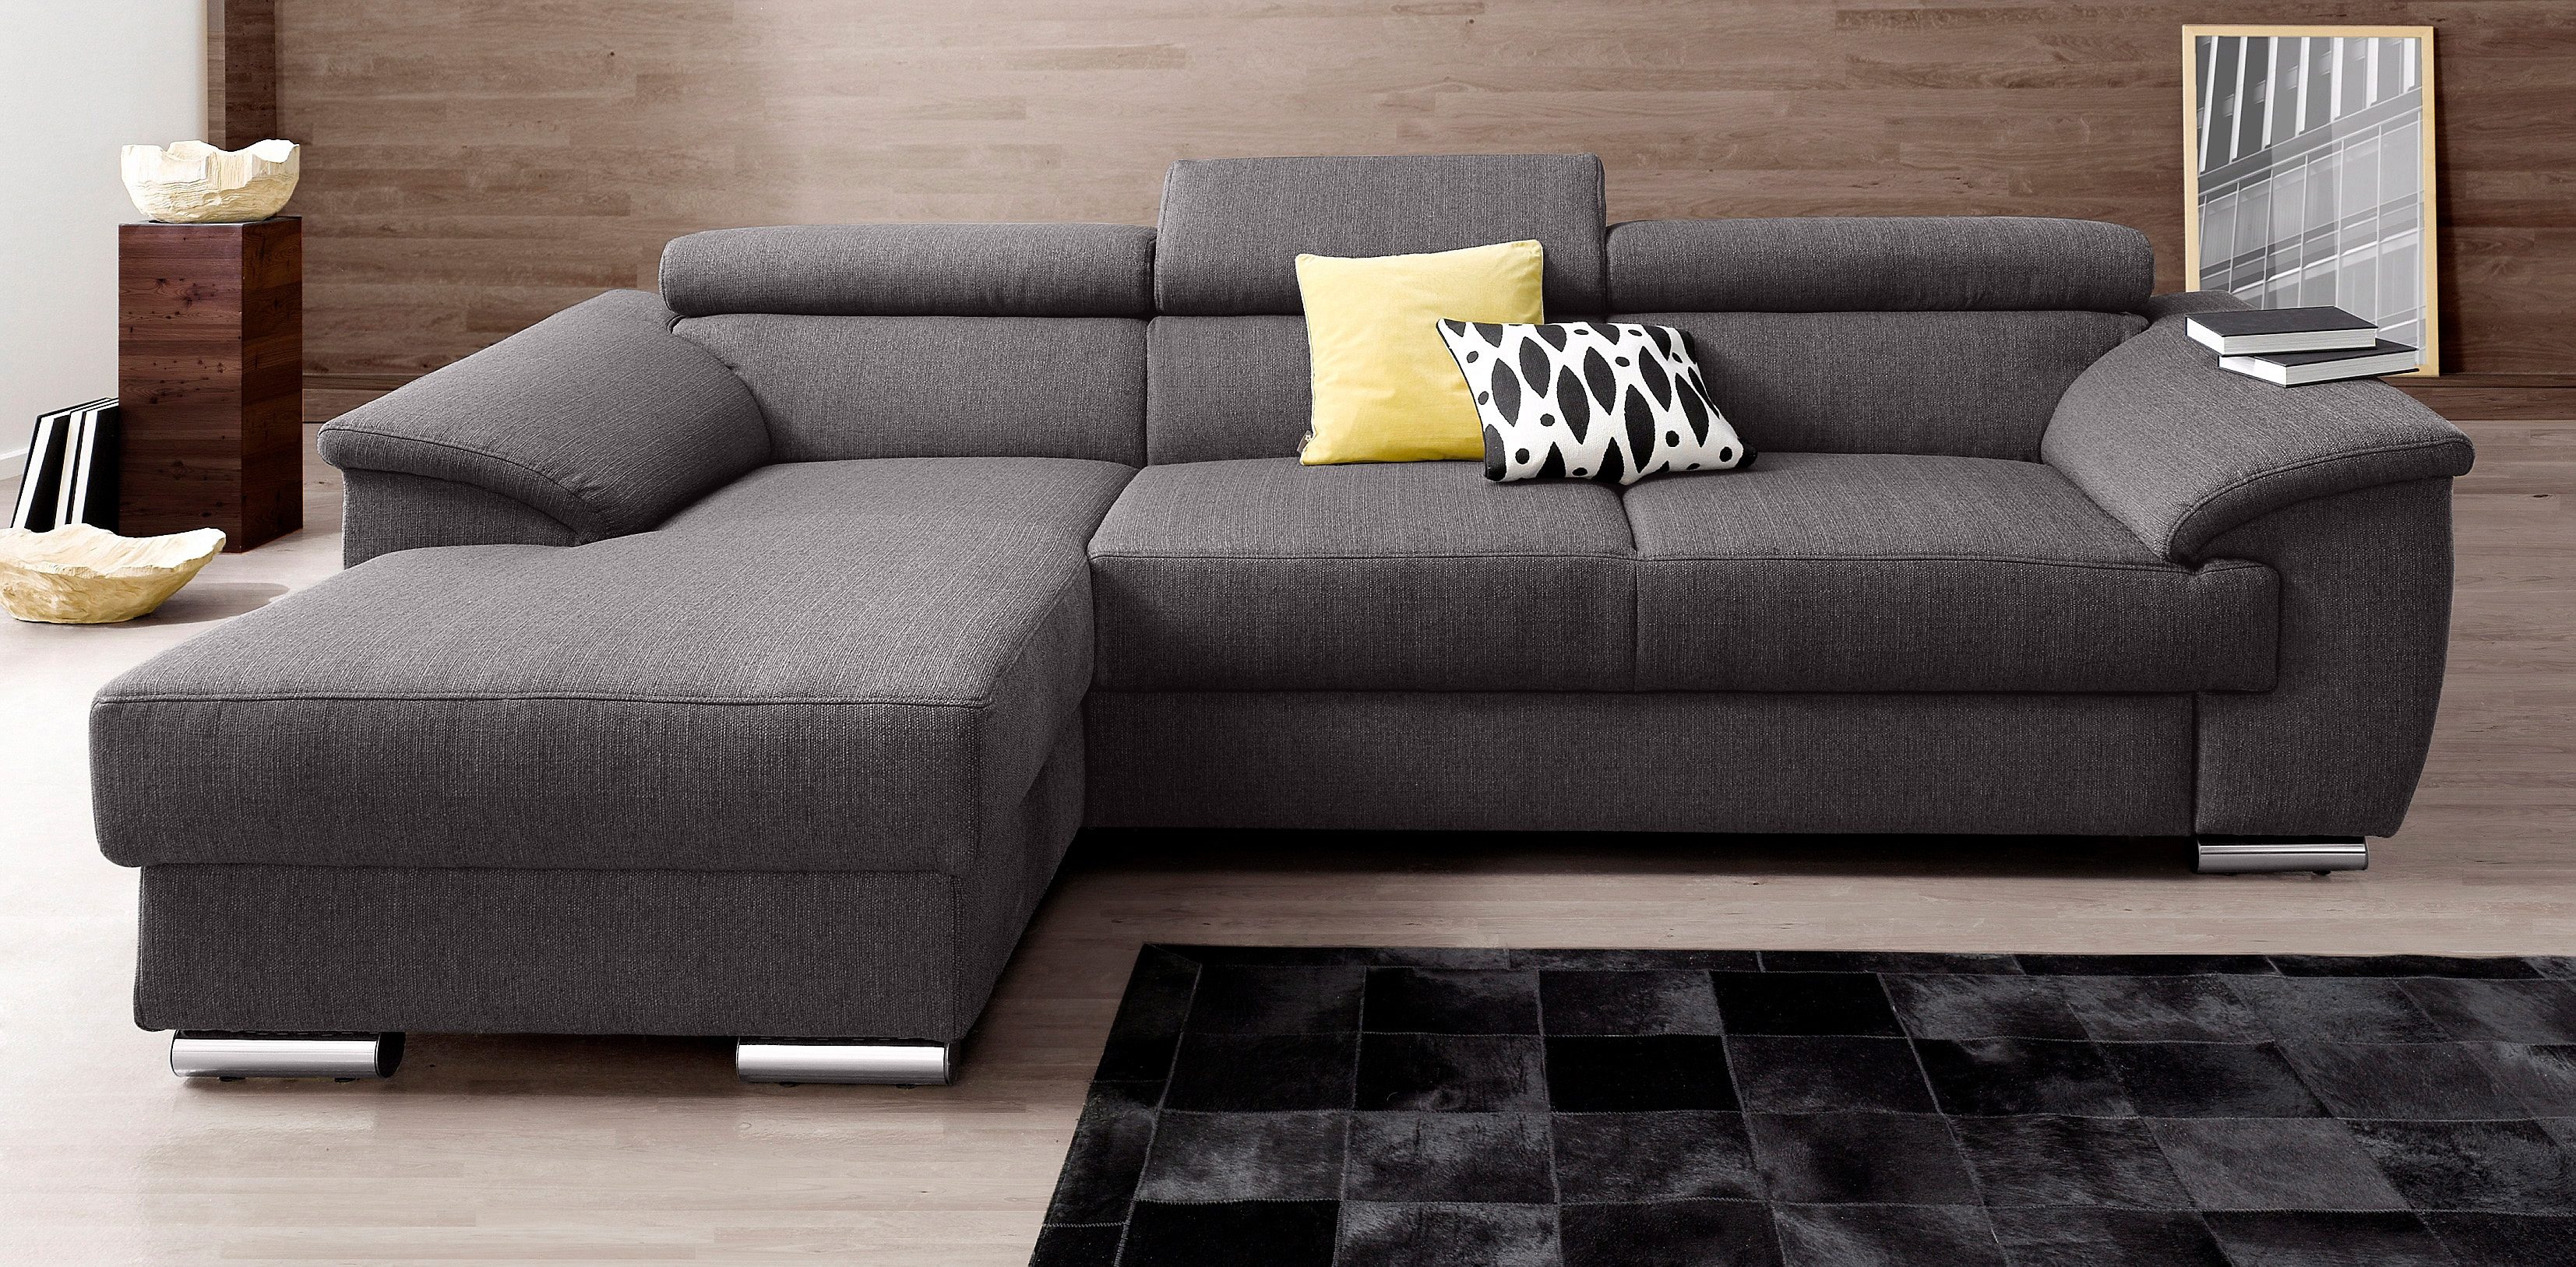 Places of Style Ecksofa David, wahlweise mit Bettfunktion